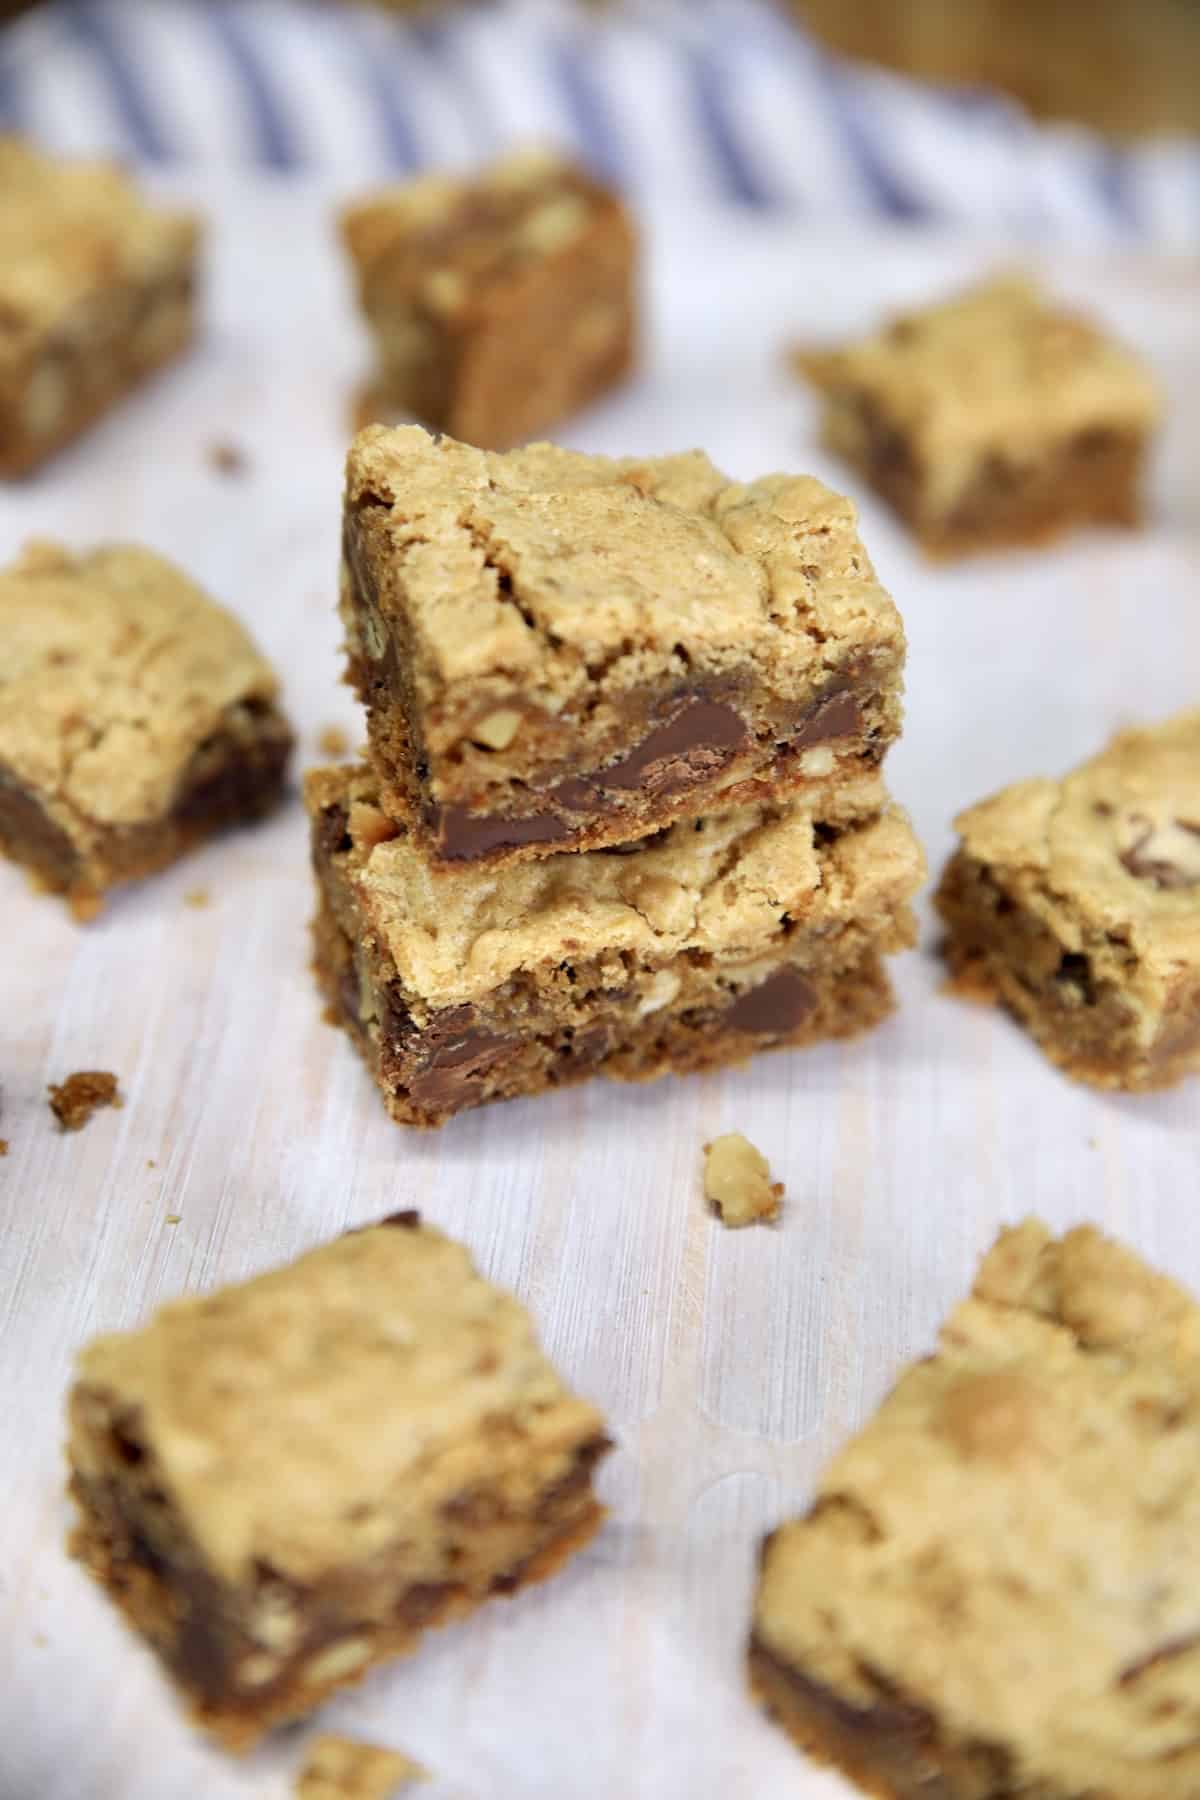 Cookie bars cut into small squares, some stacked.